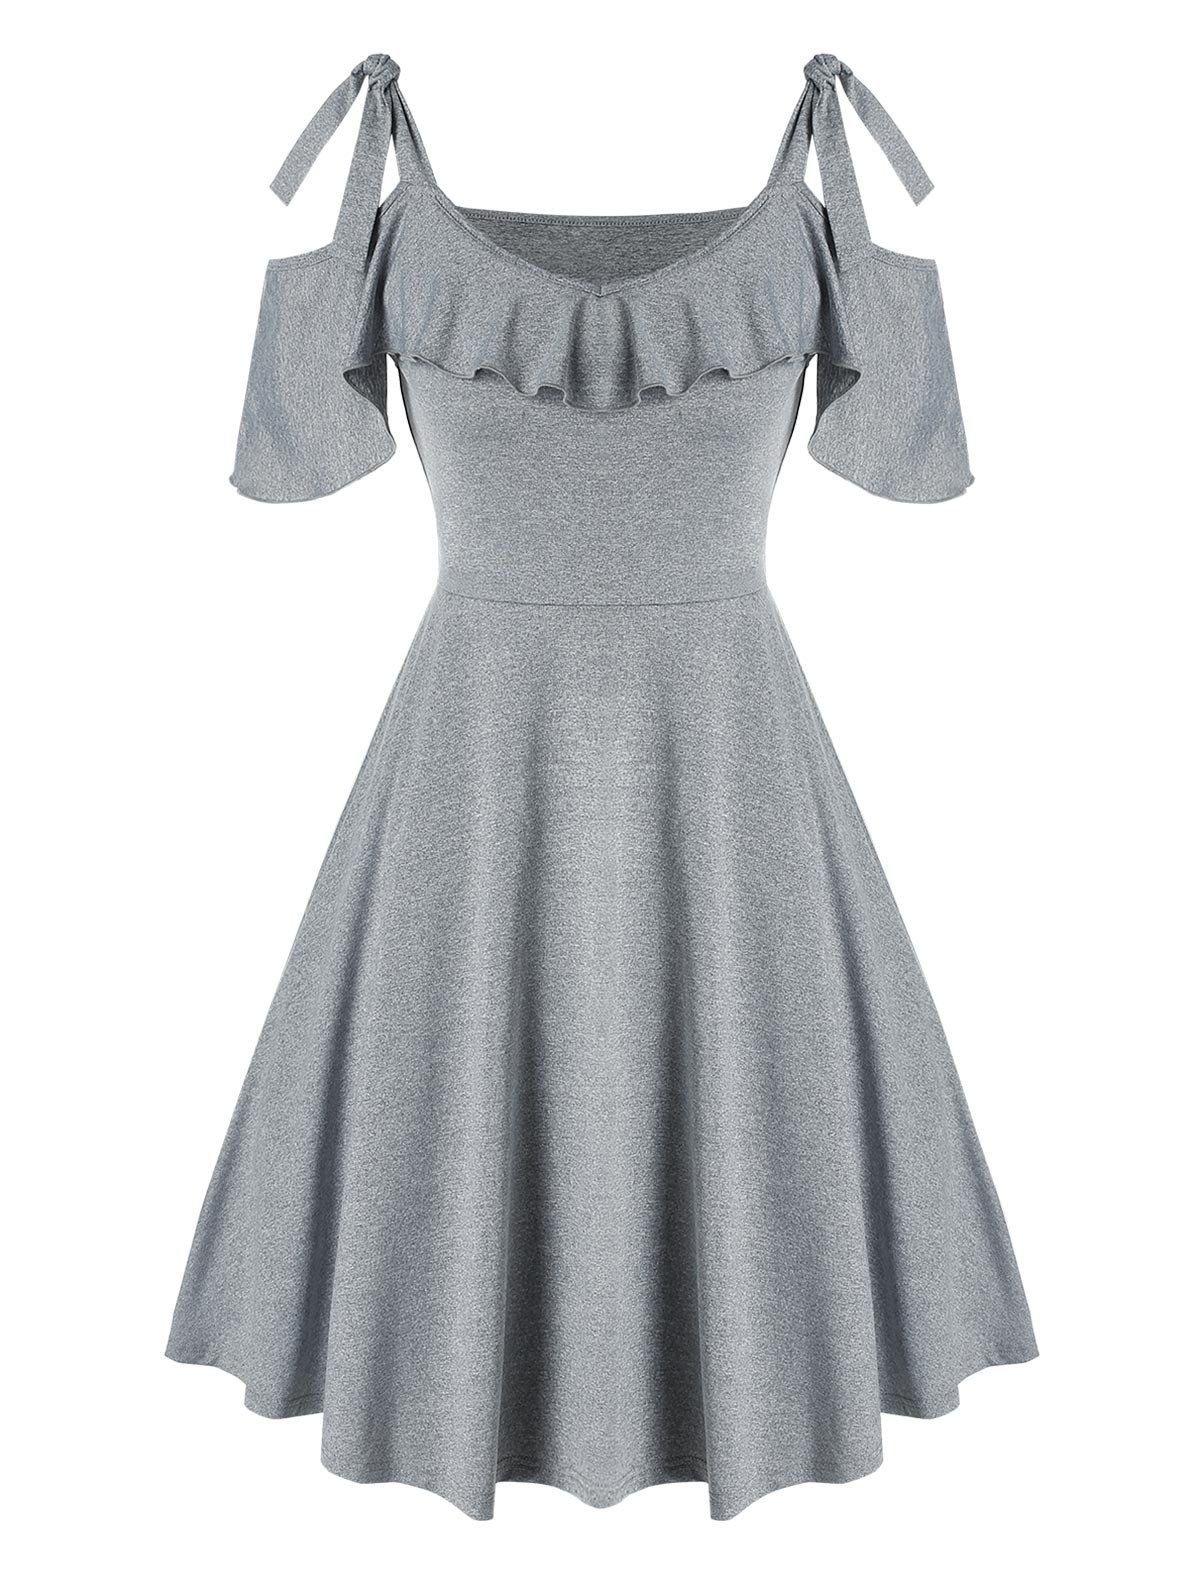 Cold Shoulder Tie Knot Ruffled Dress - GRAY M